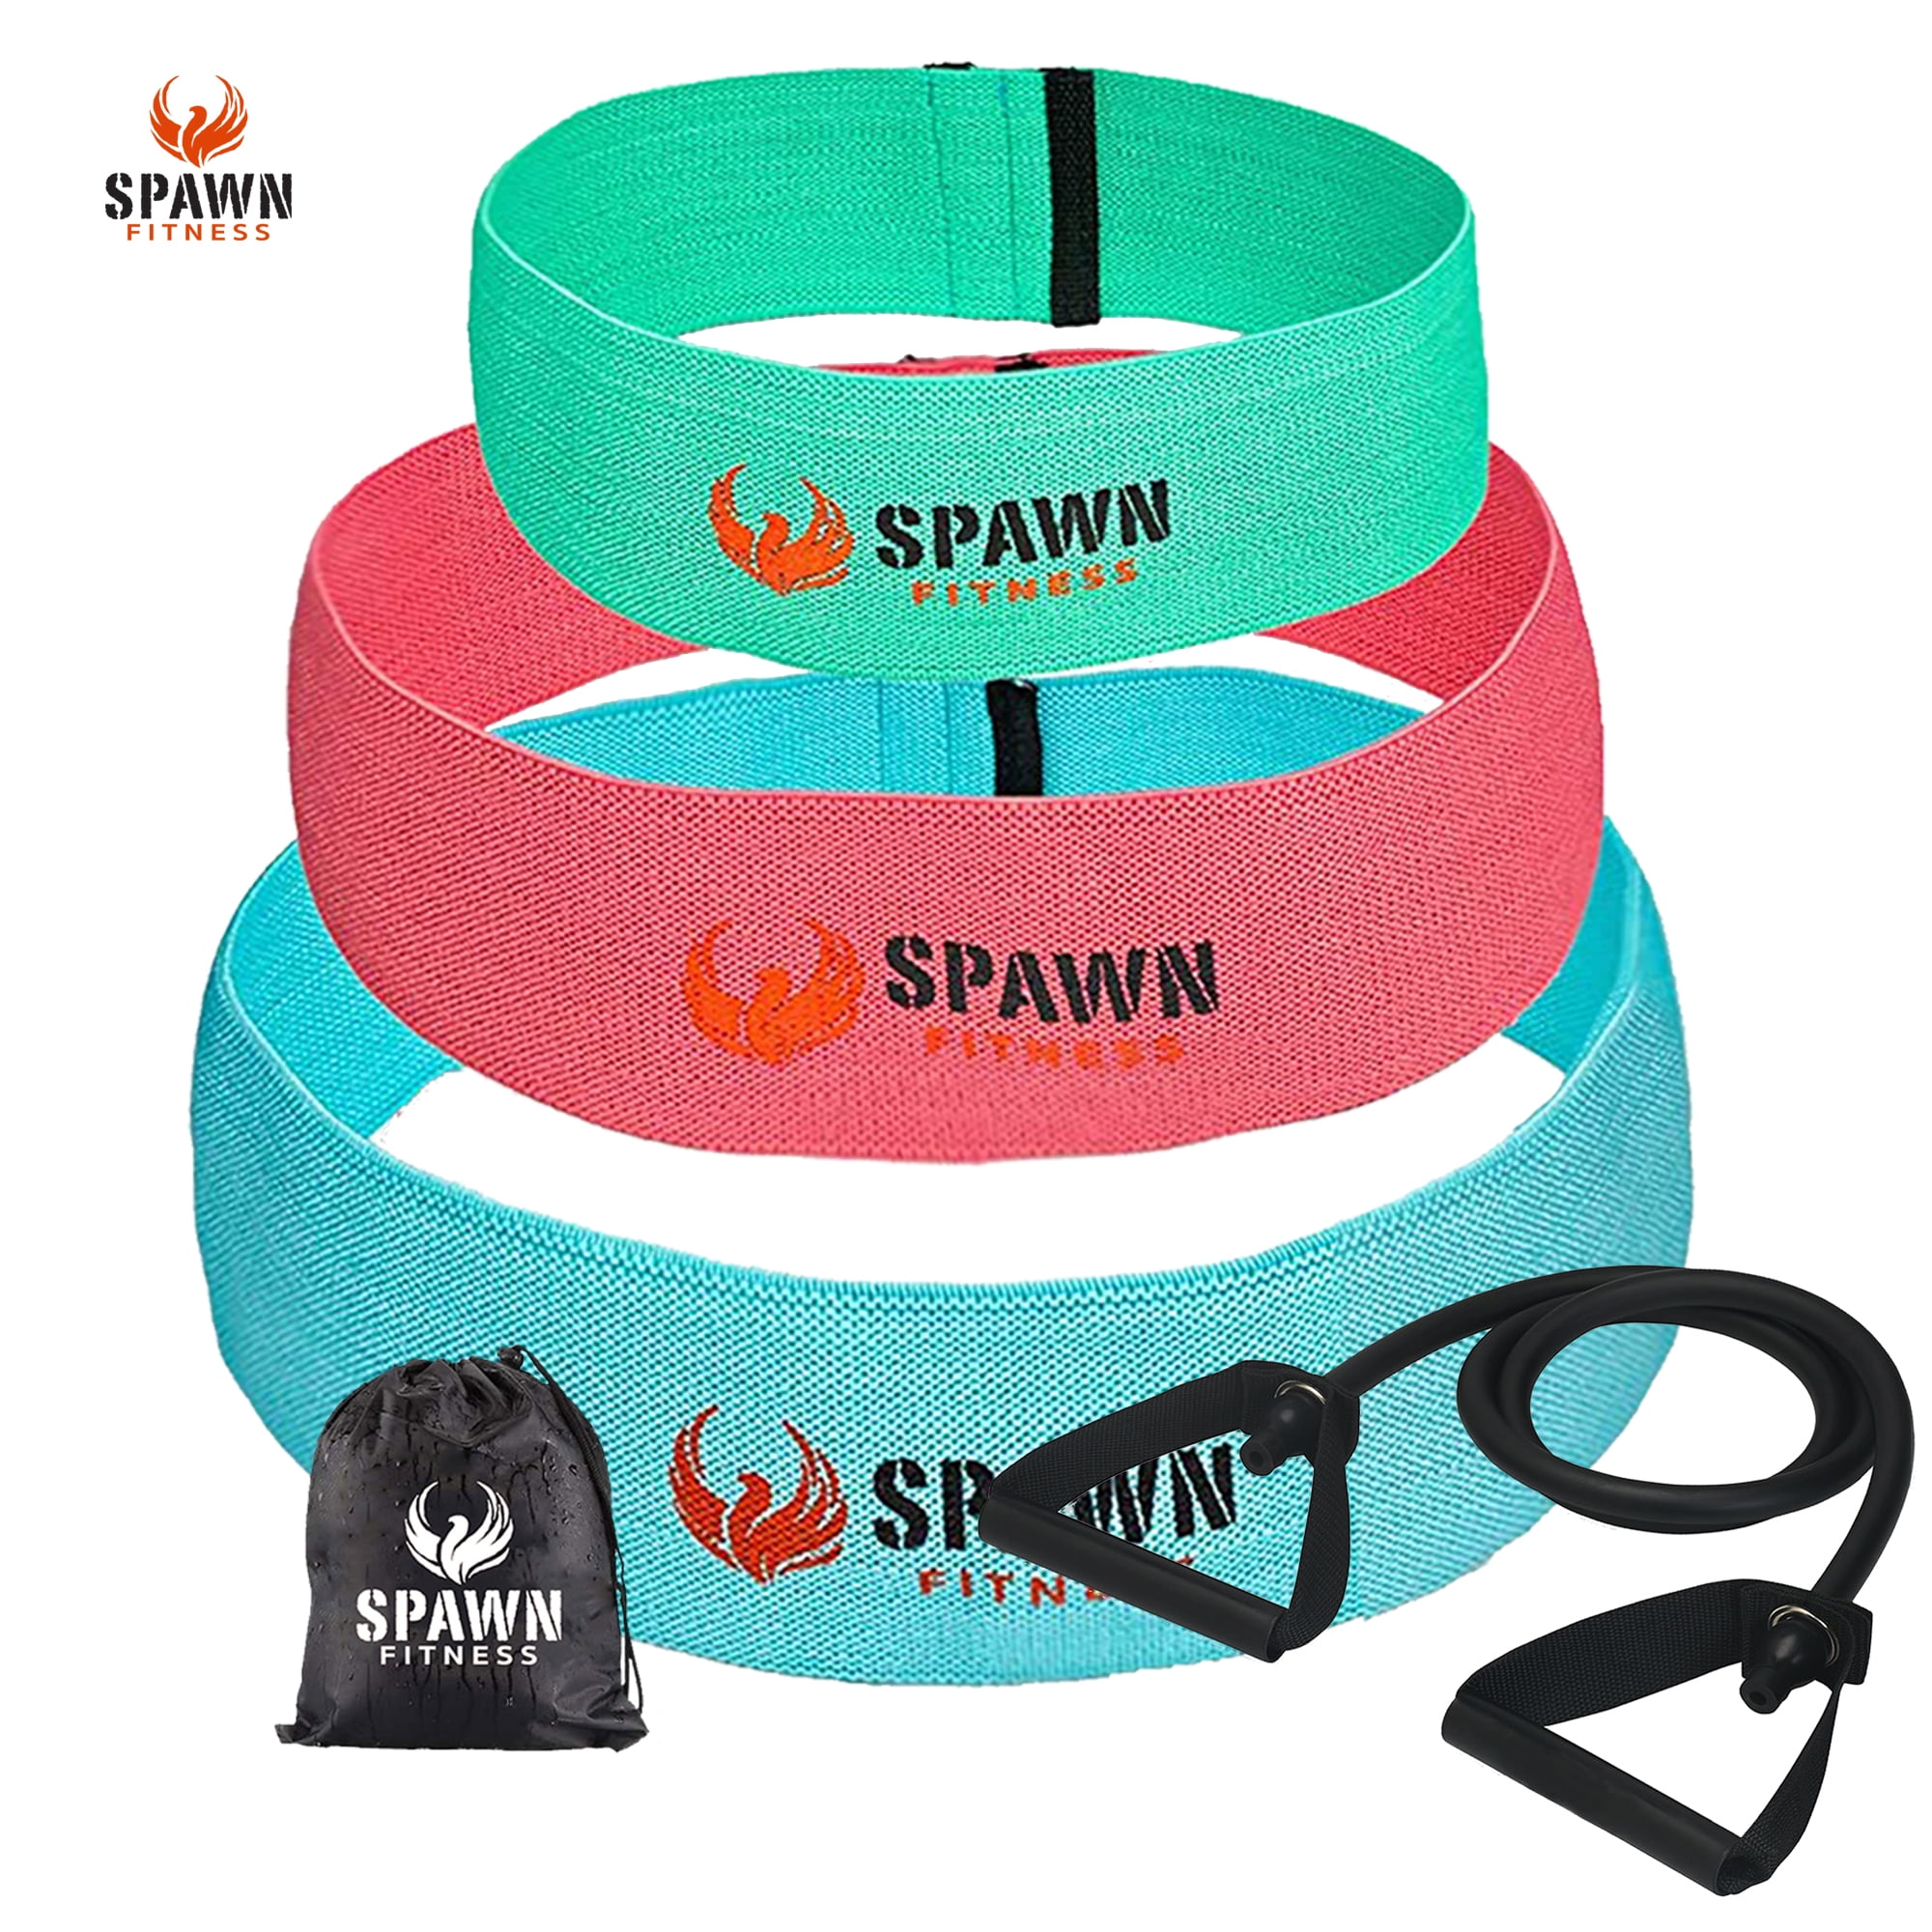 Spawn Fitness Exercise & Fitness 